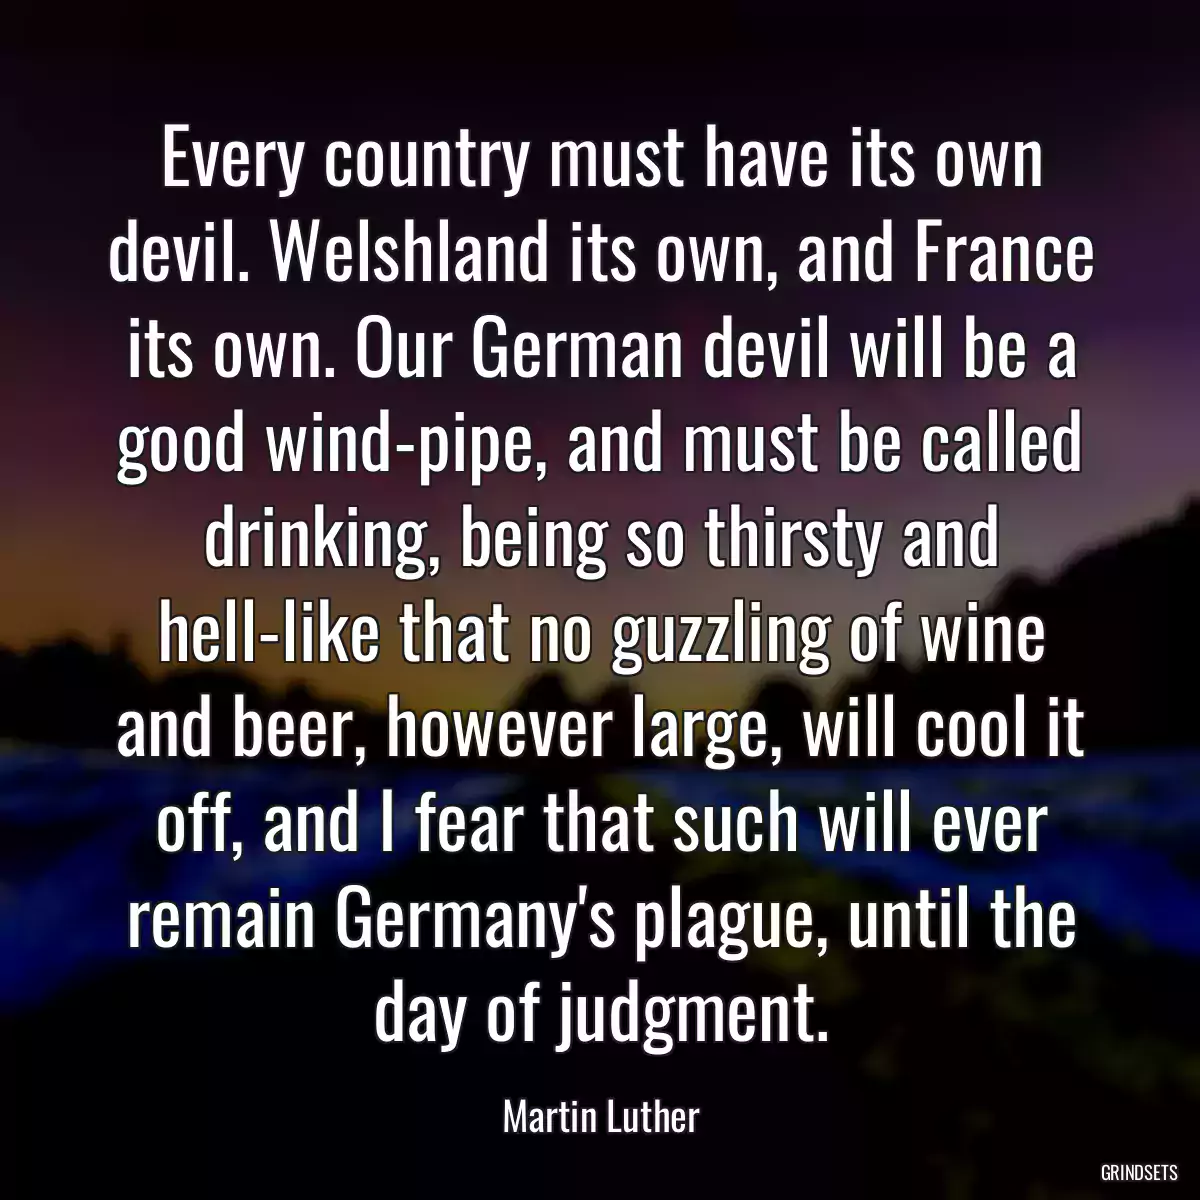 Every country must have its own devil. Welshland its own, and France its own. Our German devil will be a good wind-pipe, and must be called drinking, being so thirsty and hell-like that no guzzling of wine and beer, however large, will cool it off, and I fear that such will ever remain Germany\'s plague, until the day of judgment.